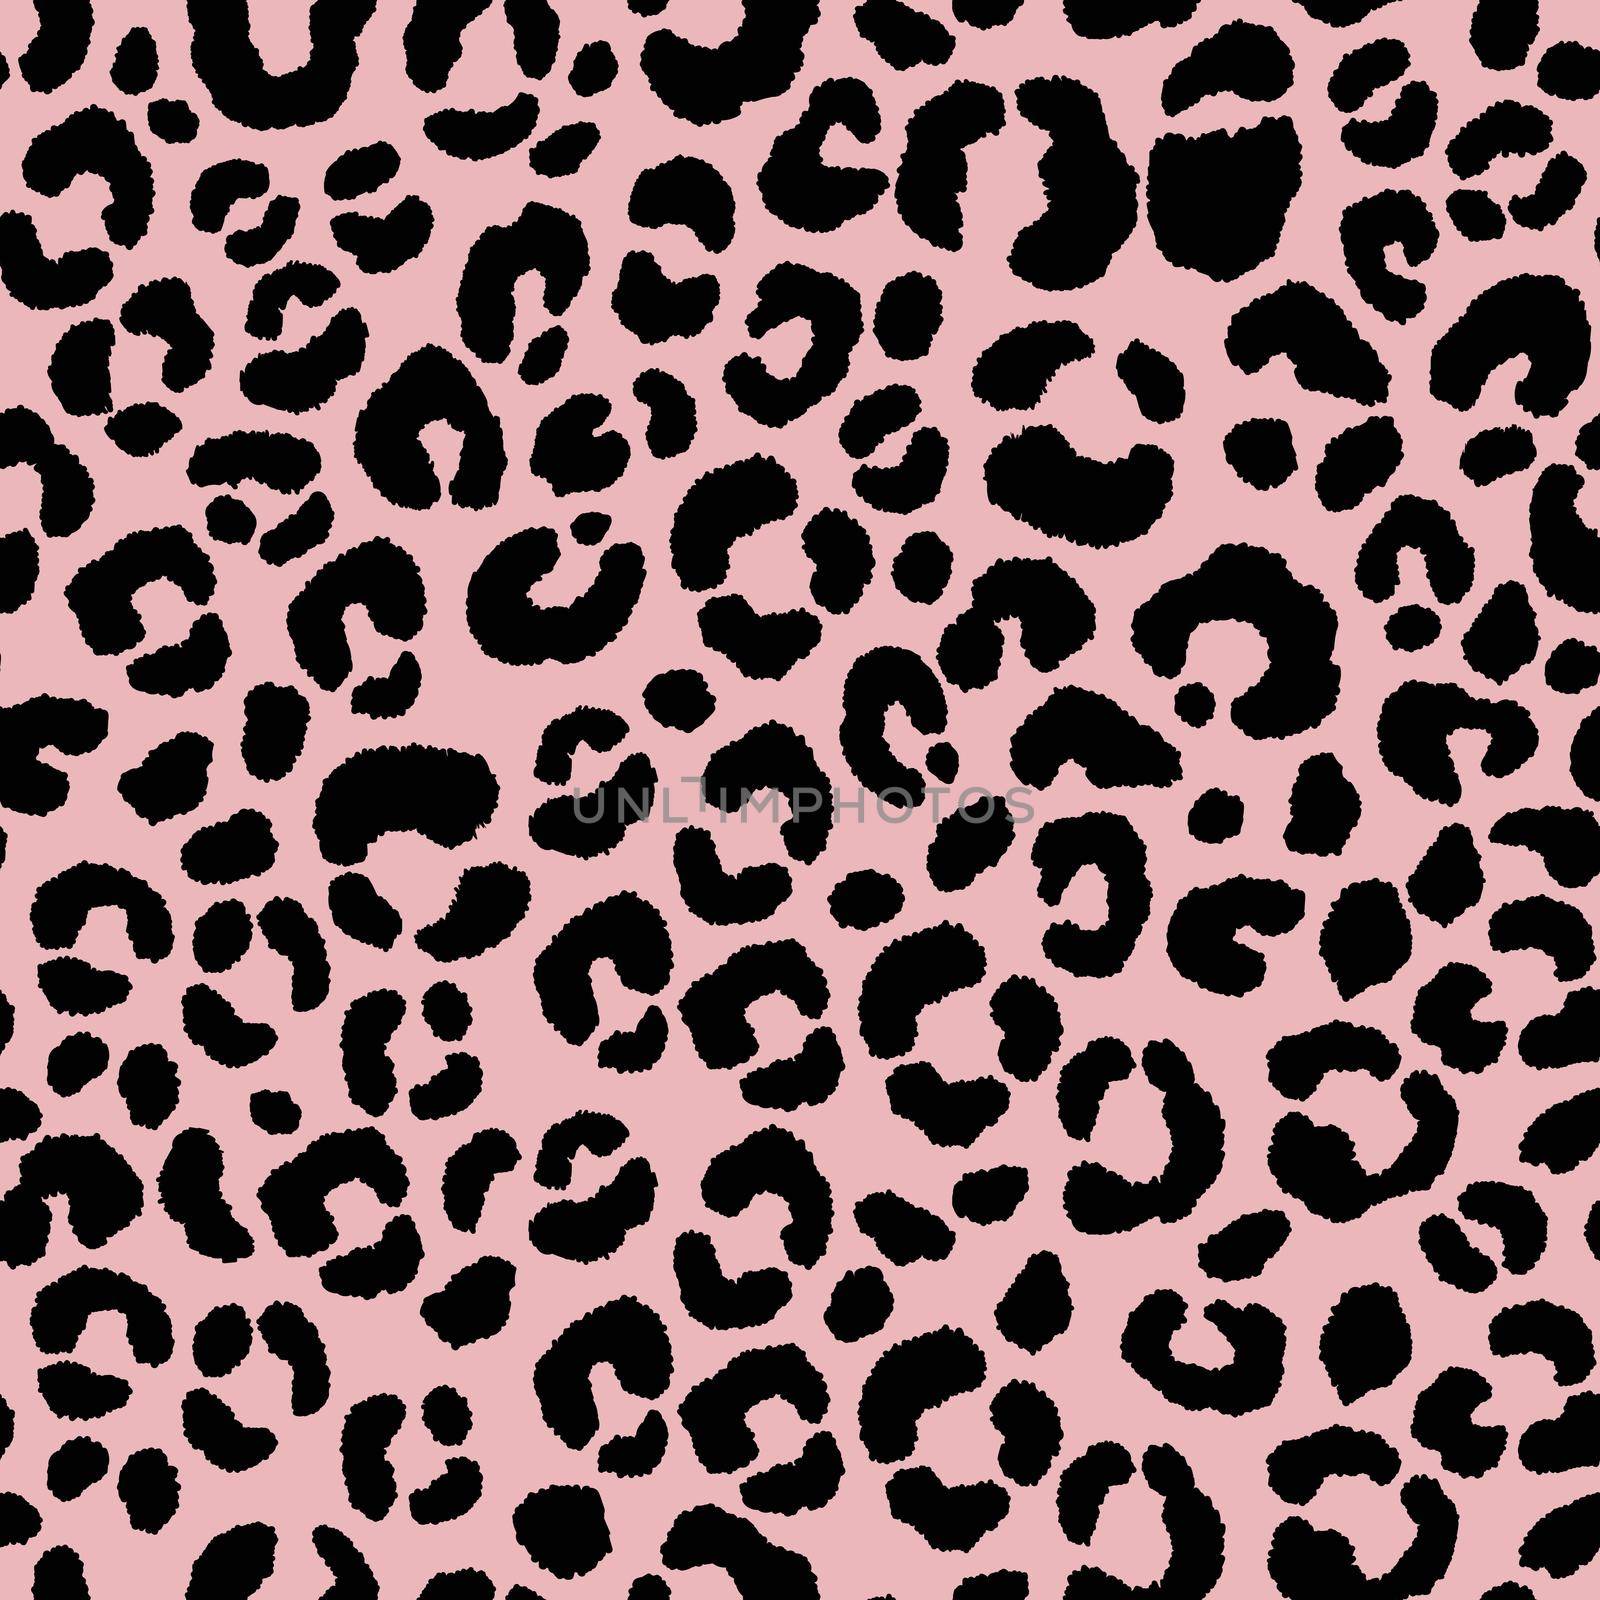 Abstract modern leopard seamless pattern. Animals trendy background. Black and pink decorative vector illustration for print, card, postcard, fabric, textile. Modern ornament of stylized skin by allaku